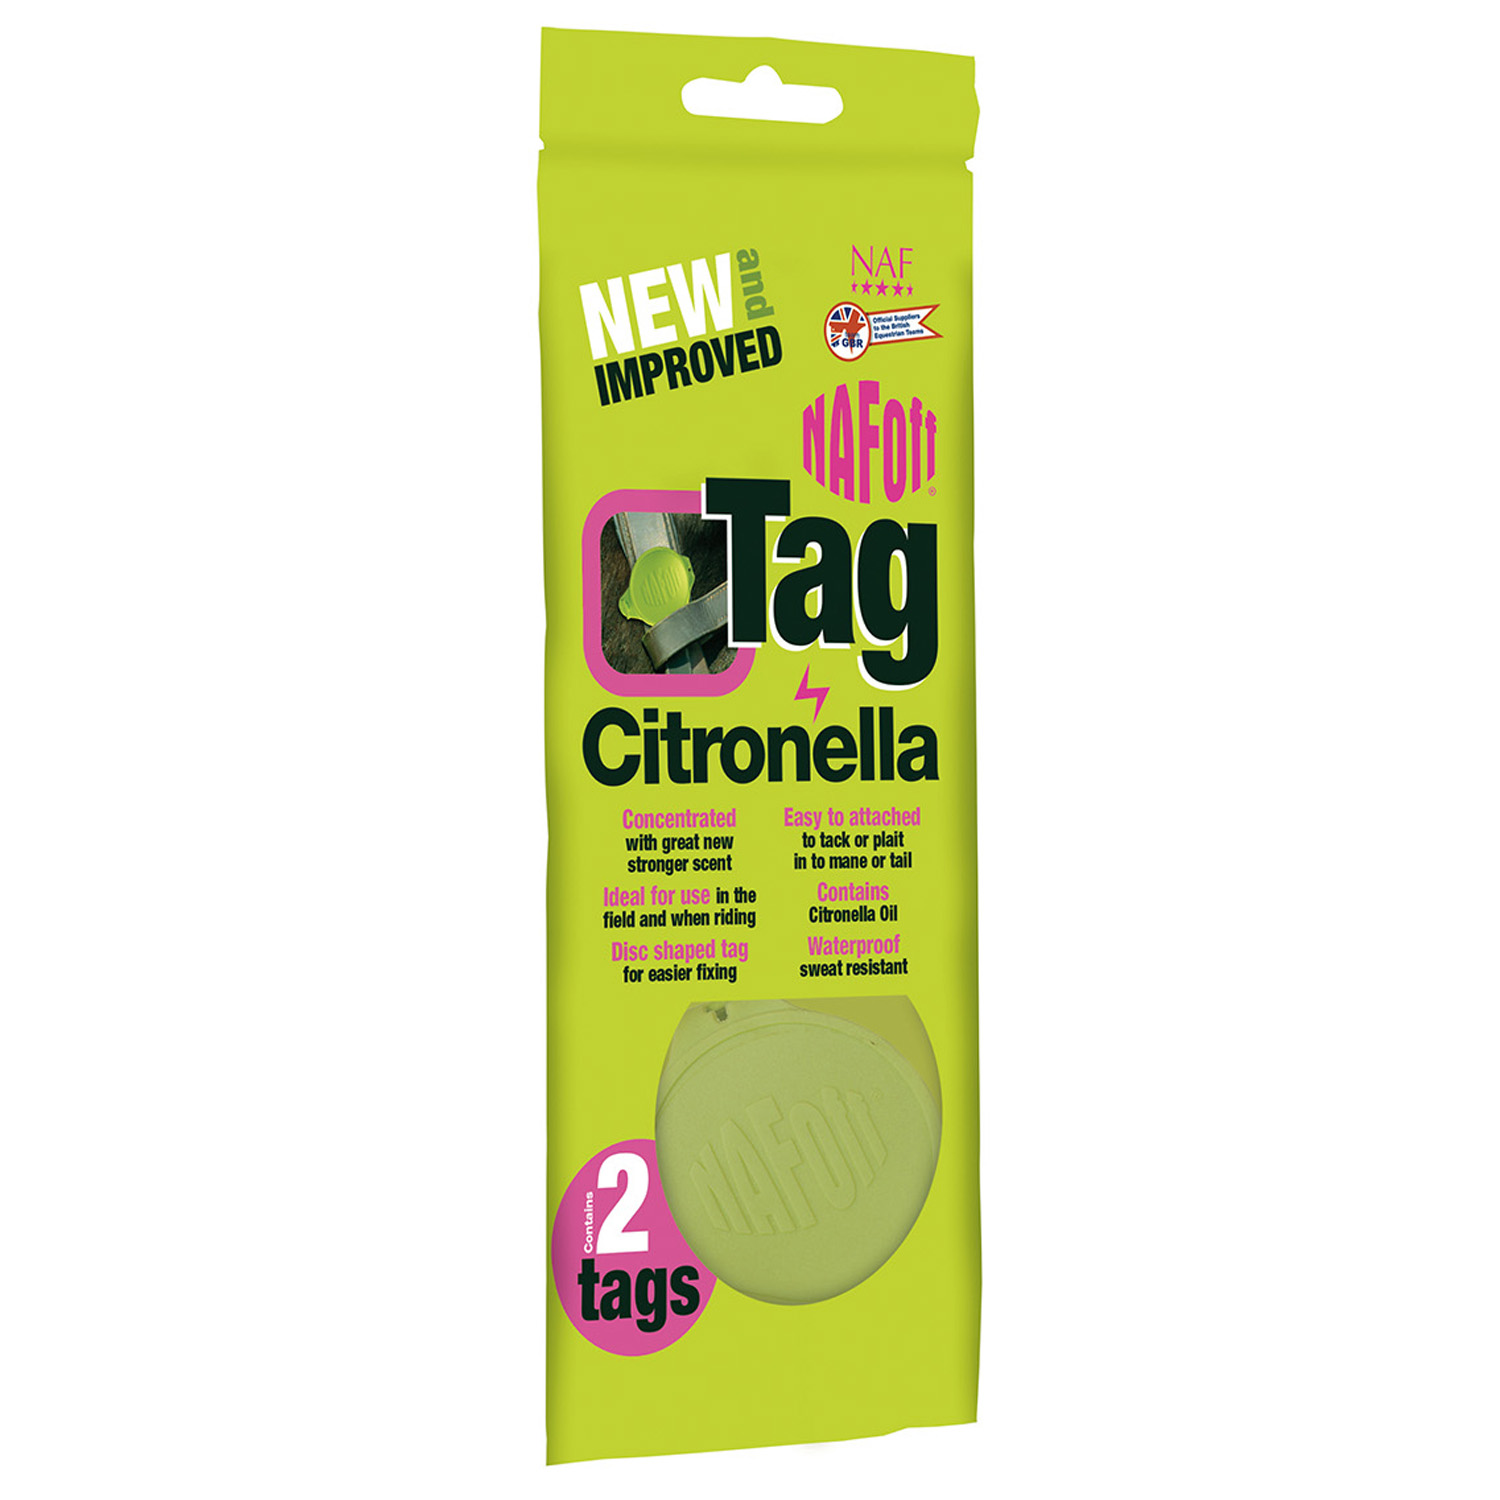 NAF OFF CITRONELLA TAG TWIN PACK TWIN PACK